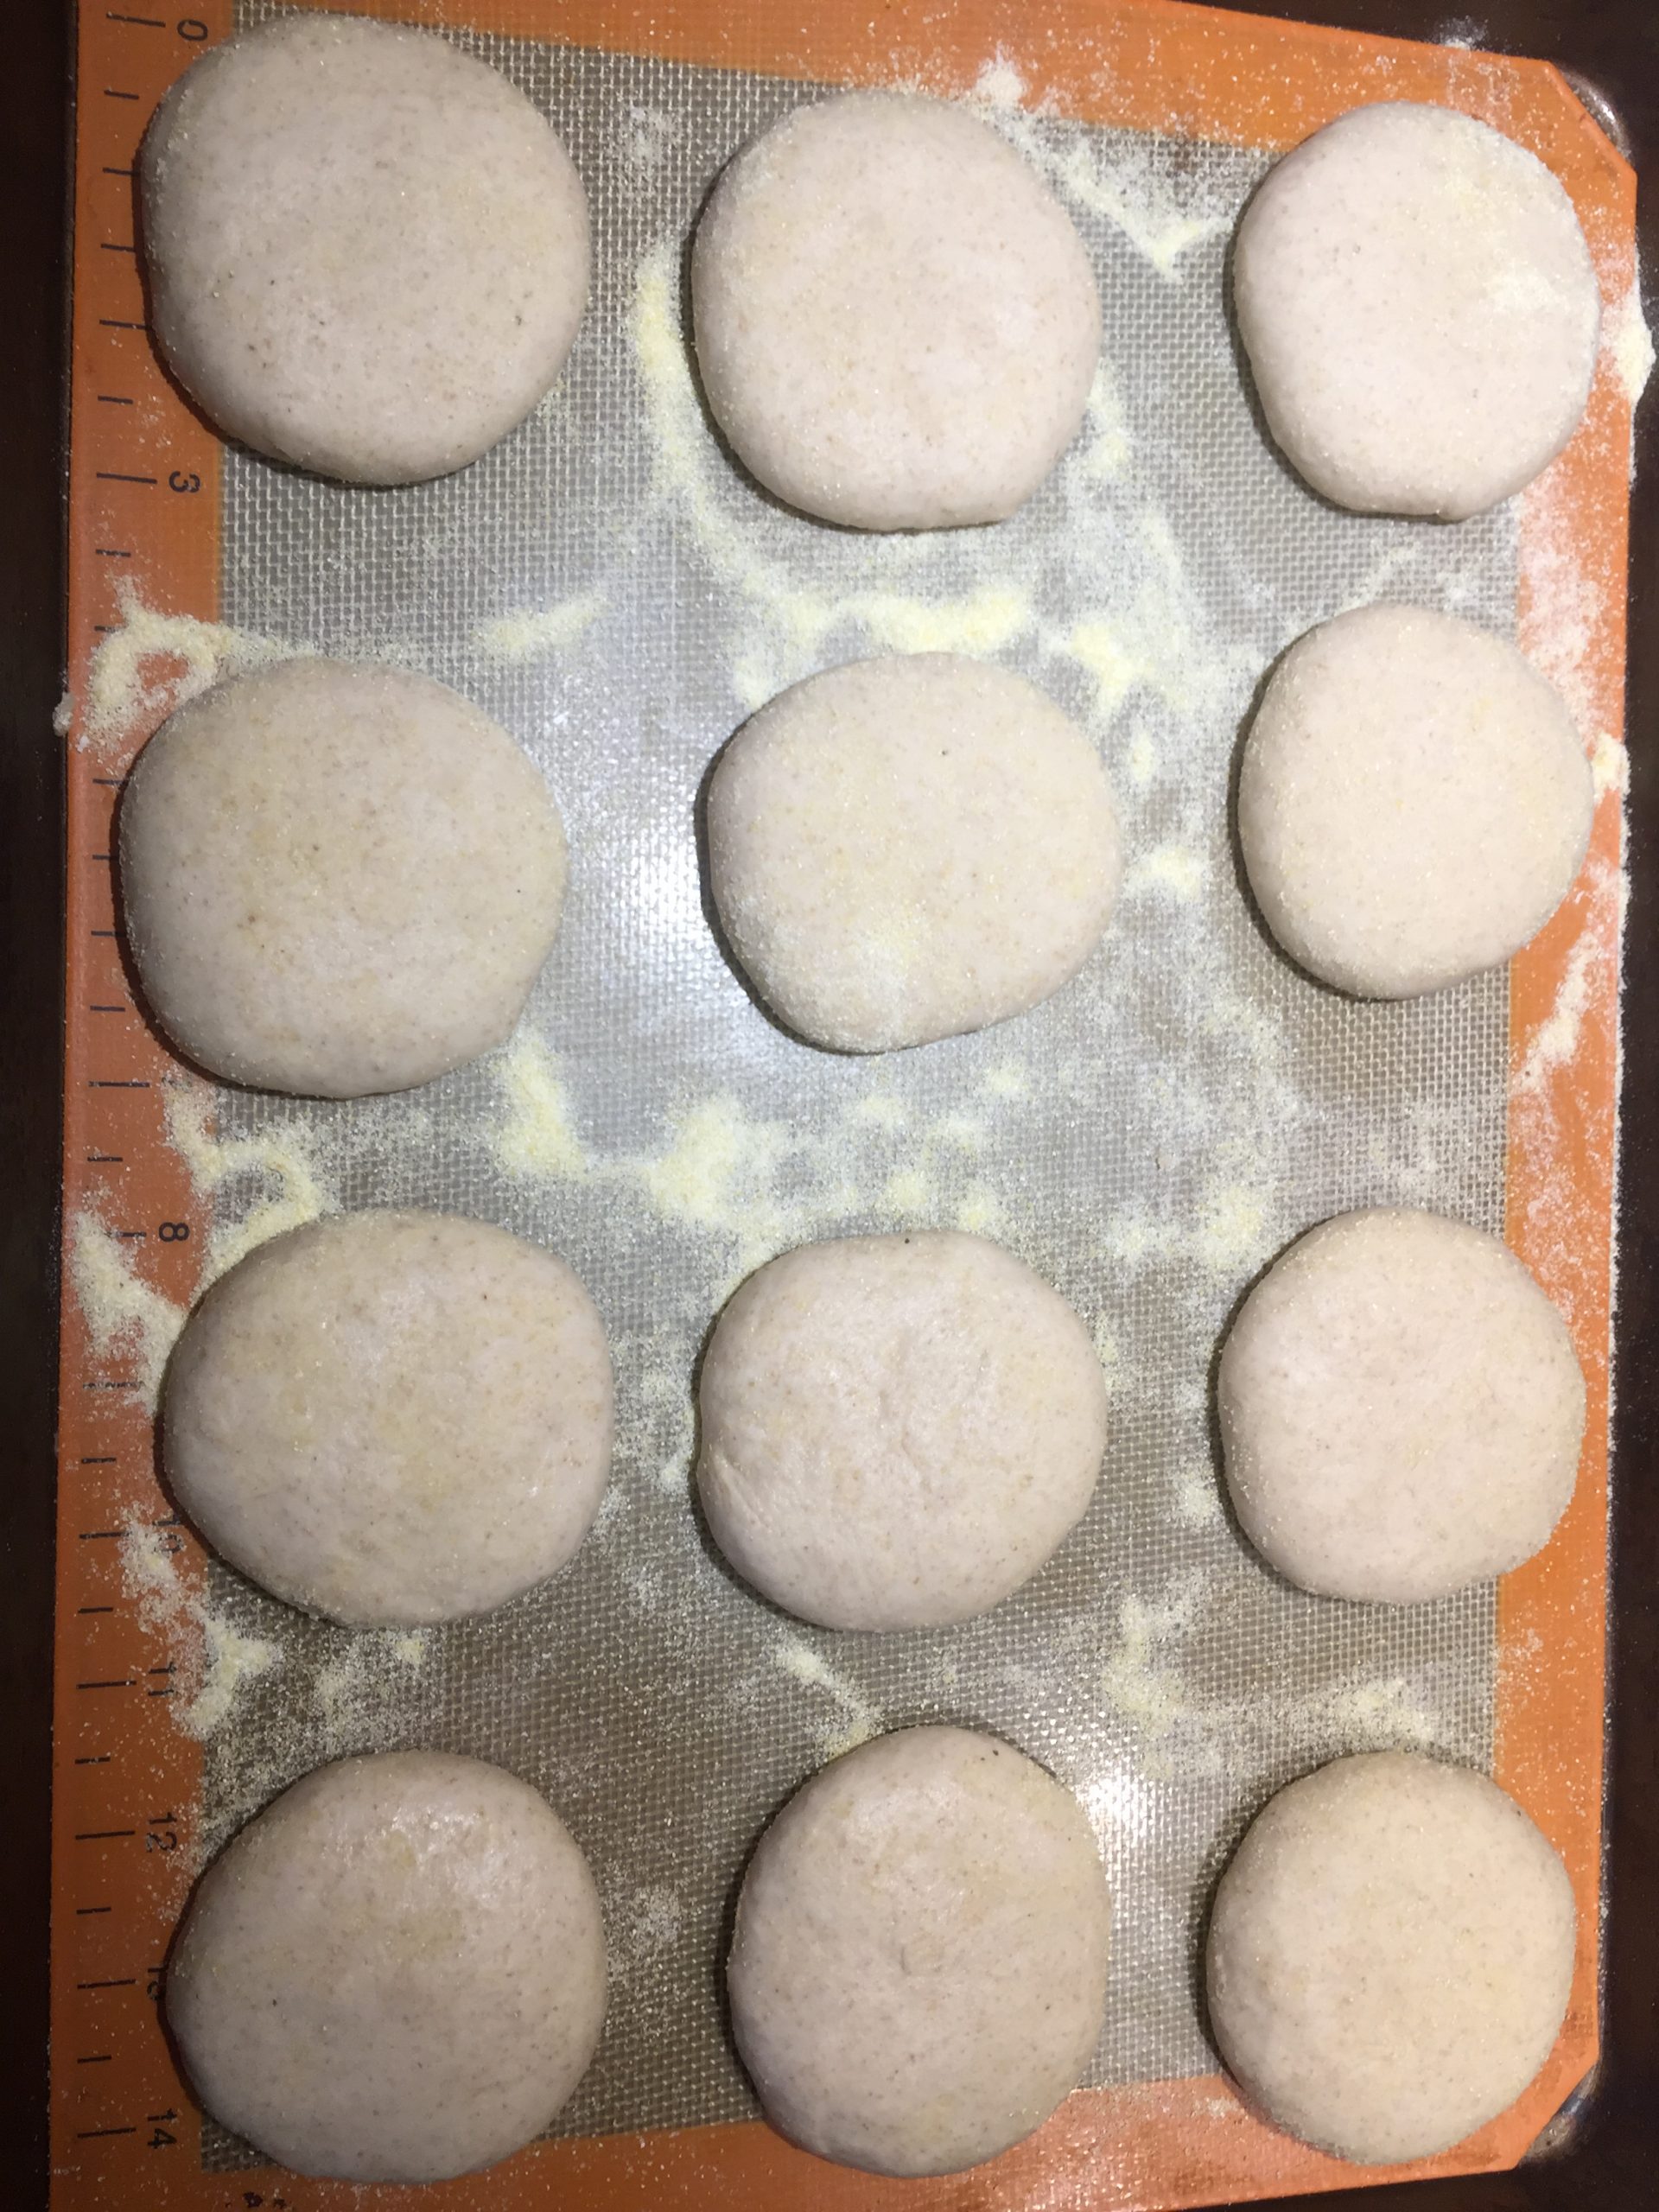 English muffins after proofing